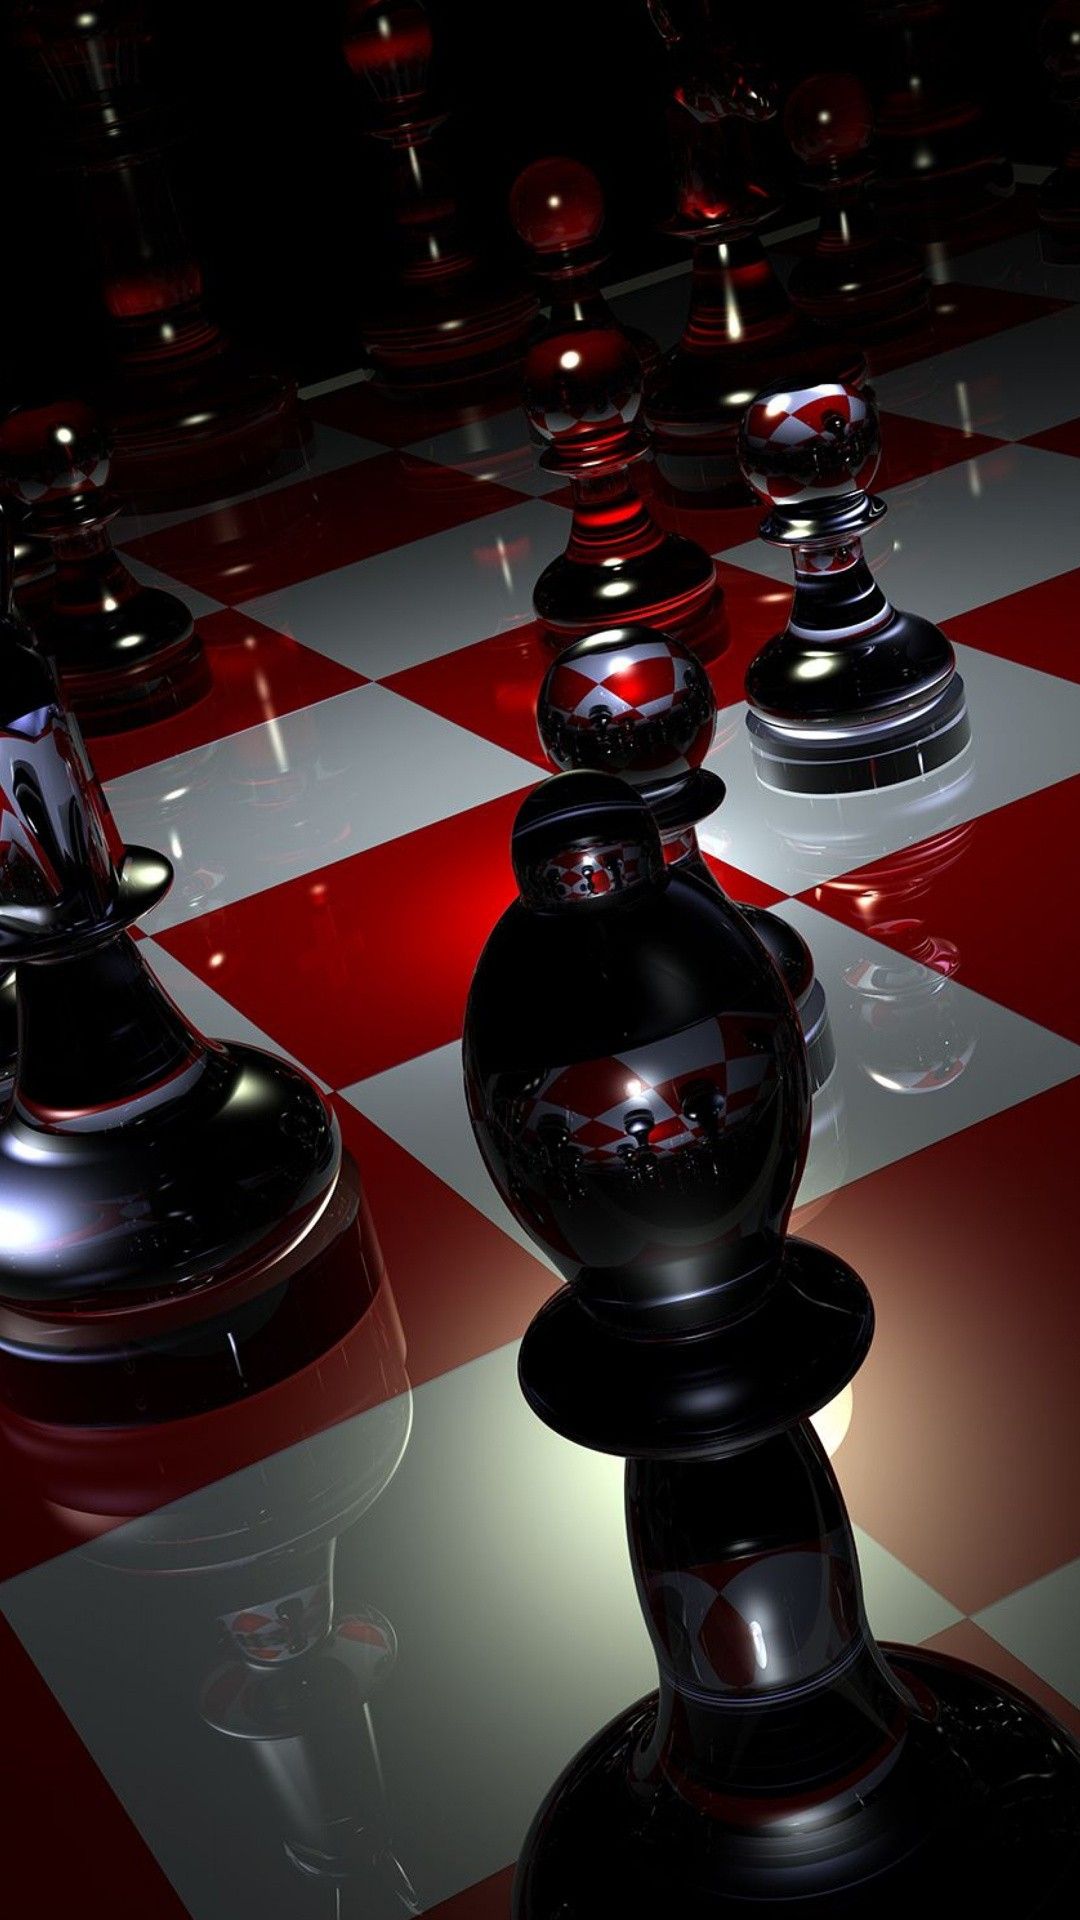 iphone 3d touch wallpaper,chess,games,indoor games and sports,board game,chessboard